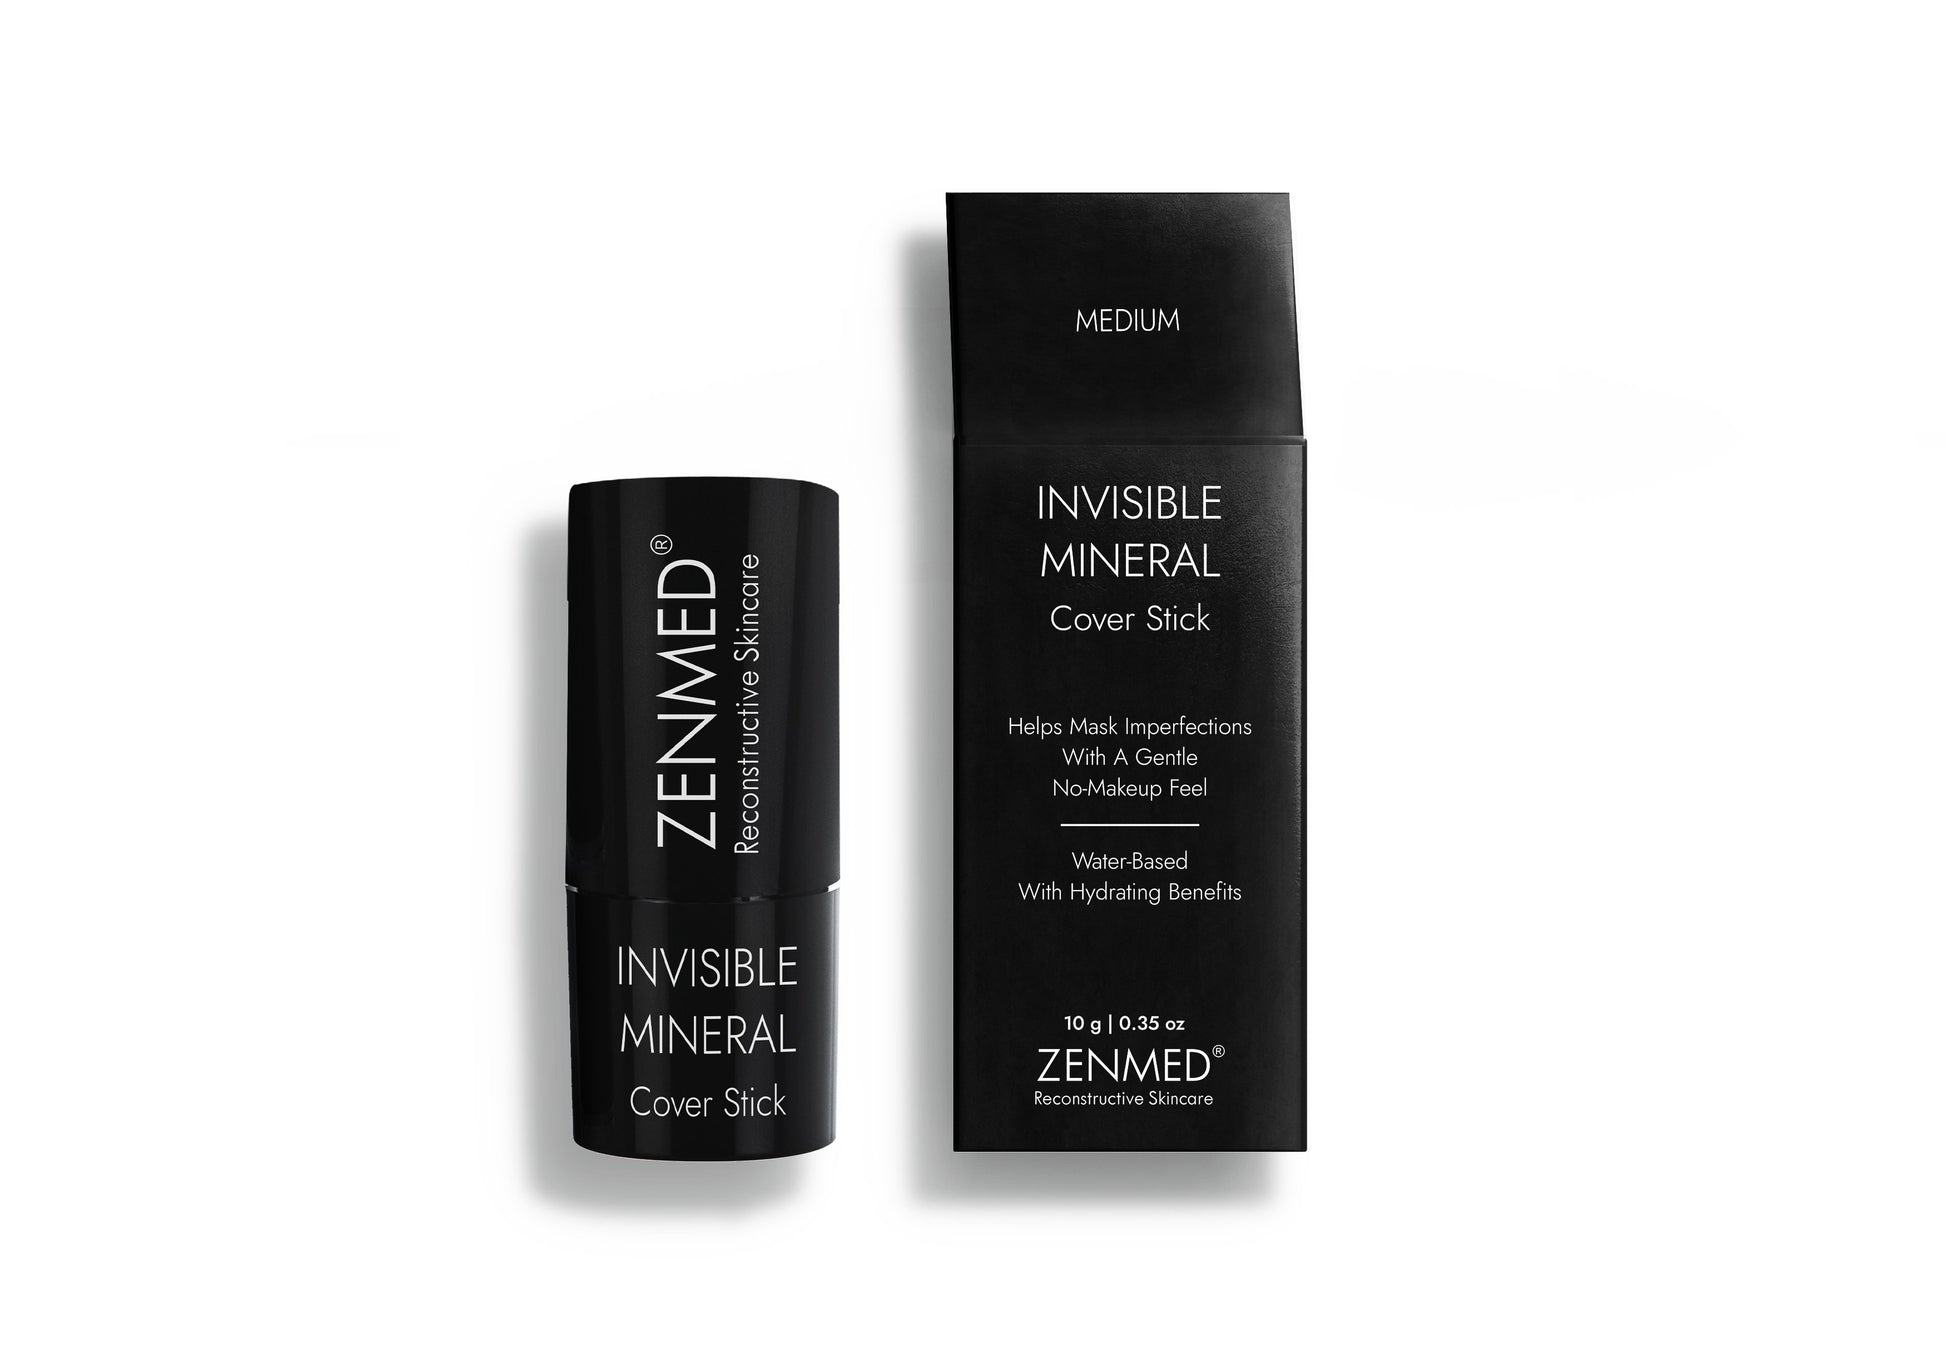 ZENMED invisible Mineral Coverstick - Medium Shade 